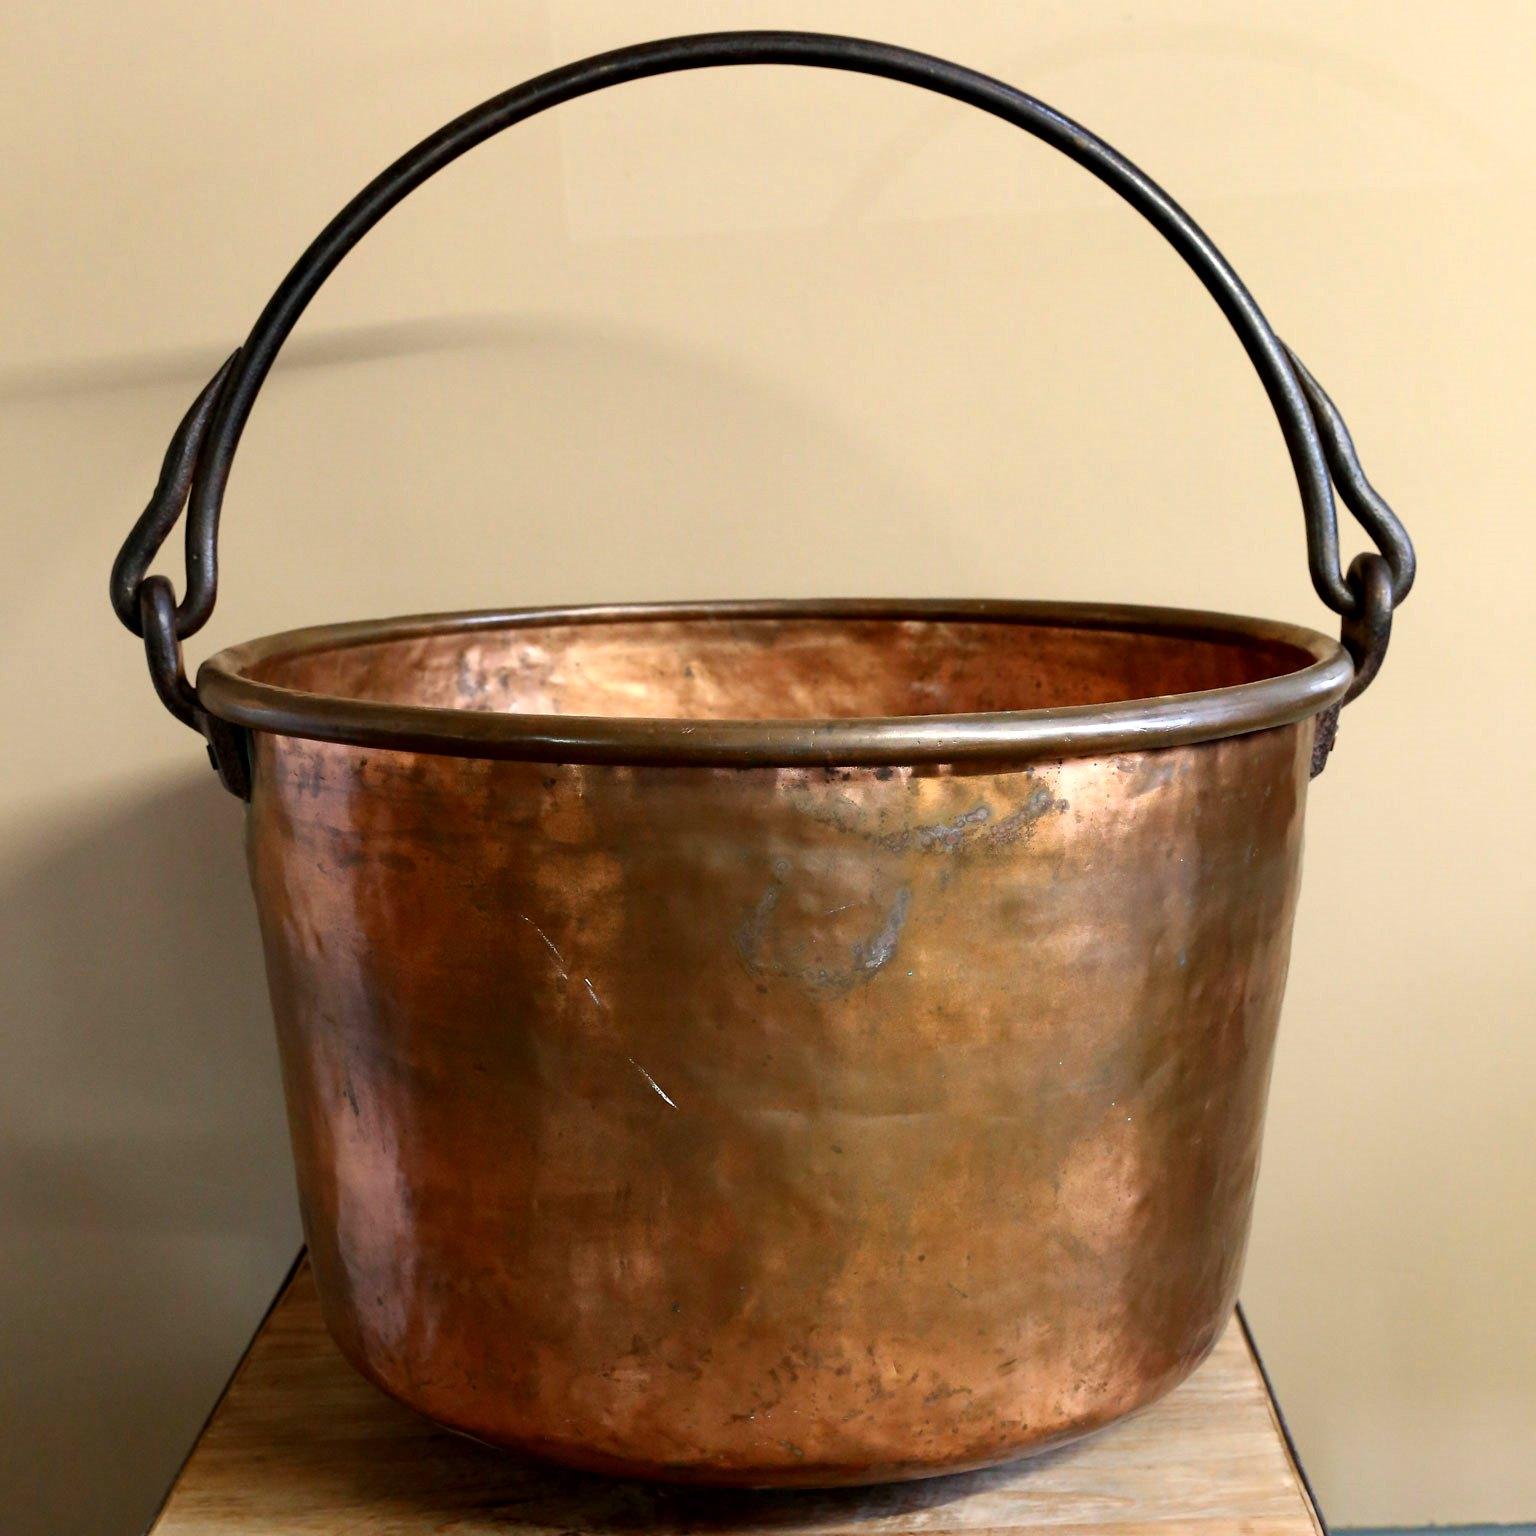 This antique copper apple butter kettle was made in the US. It was handmade and hand-hammered and the iron handle was forged. It is a beautiful object and would be great as to hold logs, etc. The pure and simple lines are pleasing and timeless. Its